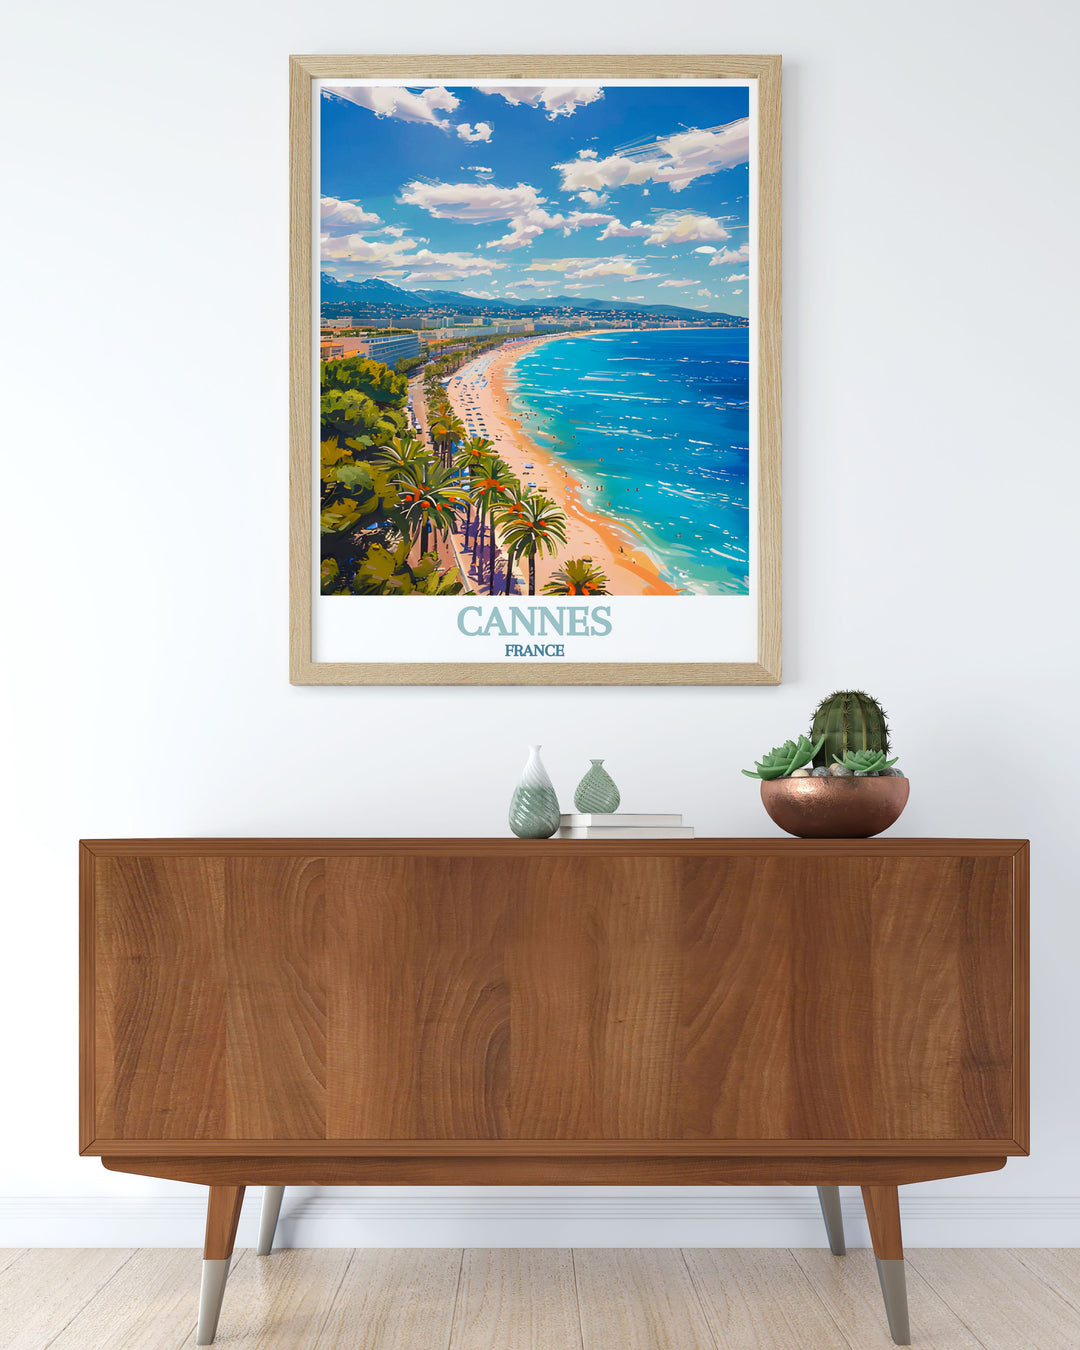 Elegant La Croisette artwork featuring the picturesque beauty of Cannes this France art print brings the charm and sophistication of French culture into your home a stunning piece of France travel art for your collection ideal for enhancing any interior space